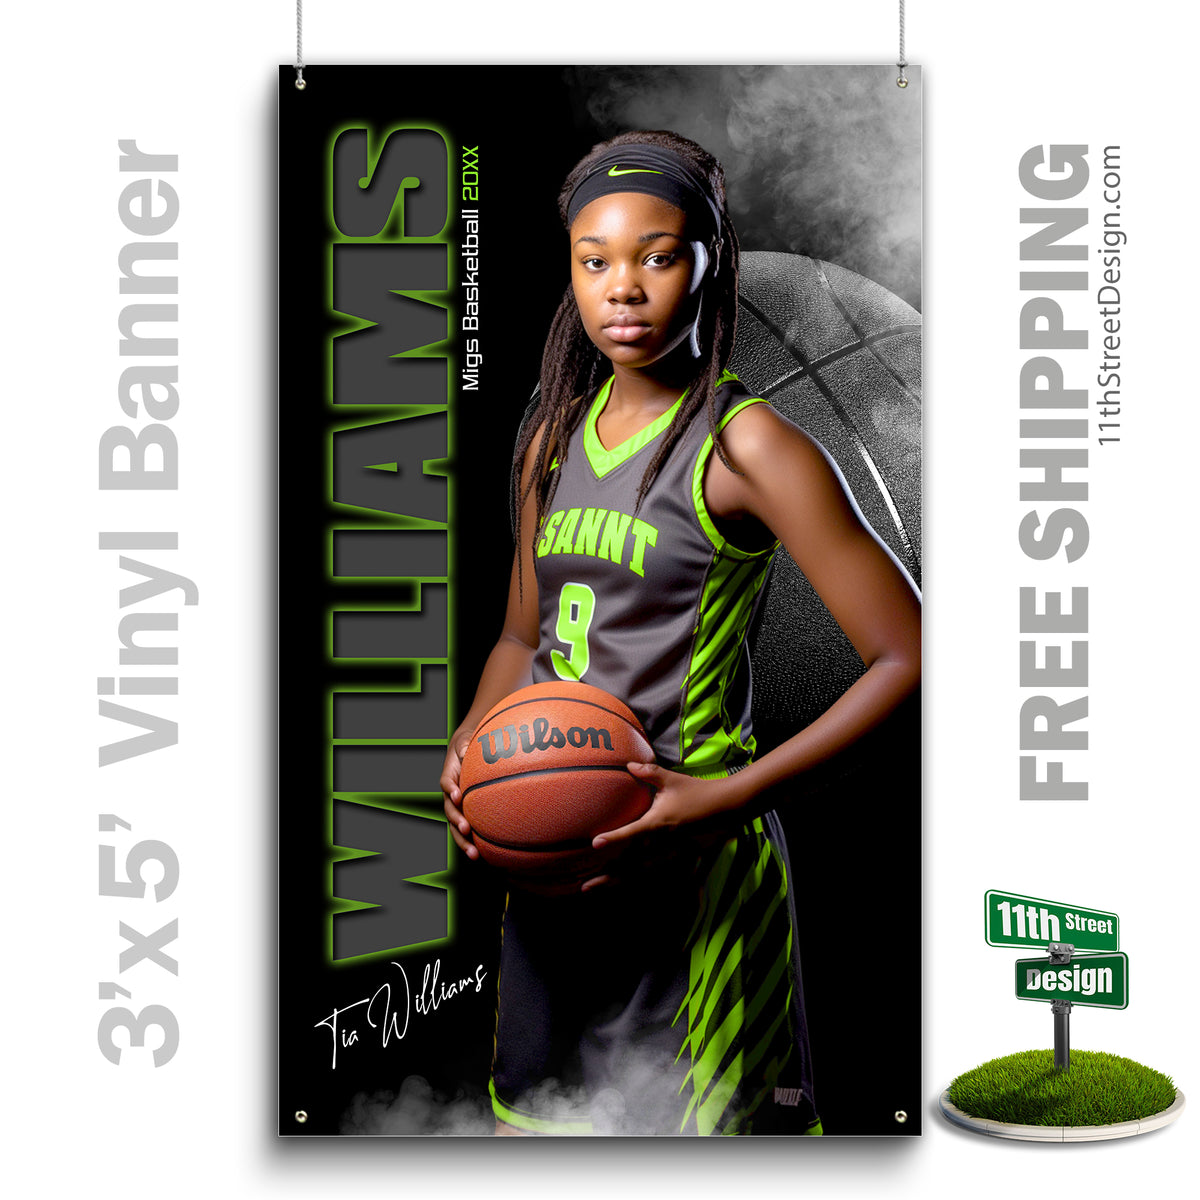 Coaches Gift, Team Gifts, Poster Print, Personalized Poster, Senior Night, Senior Poster, Sport Gift, Sports Collage, Sports Prints, Custom Sports Poster, Basketball Poster, Basketball Print, Basketball Senior,